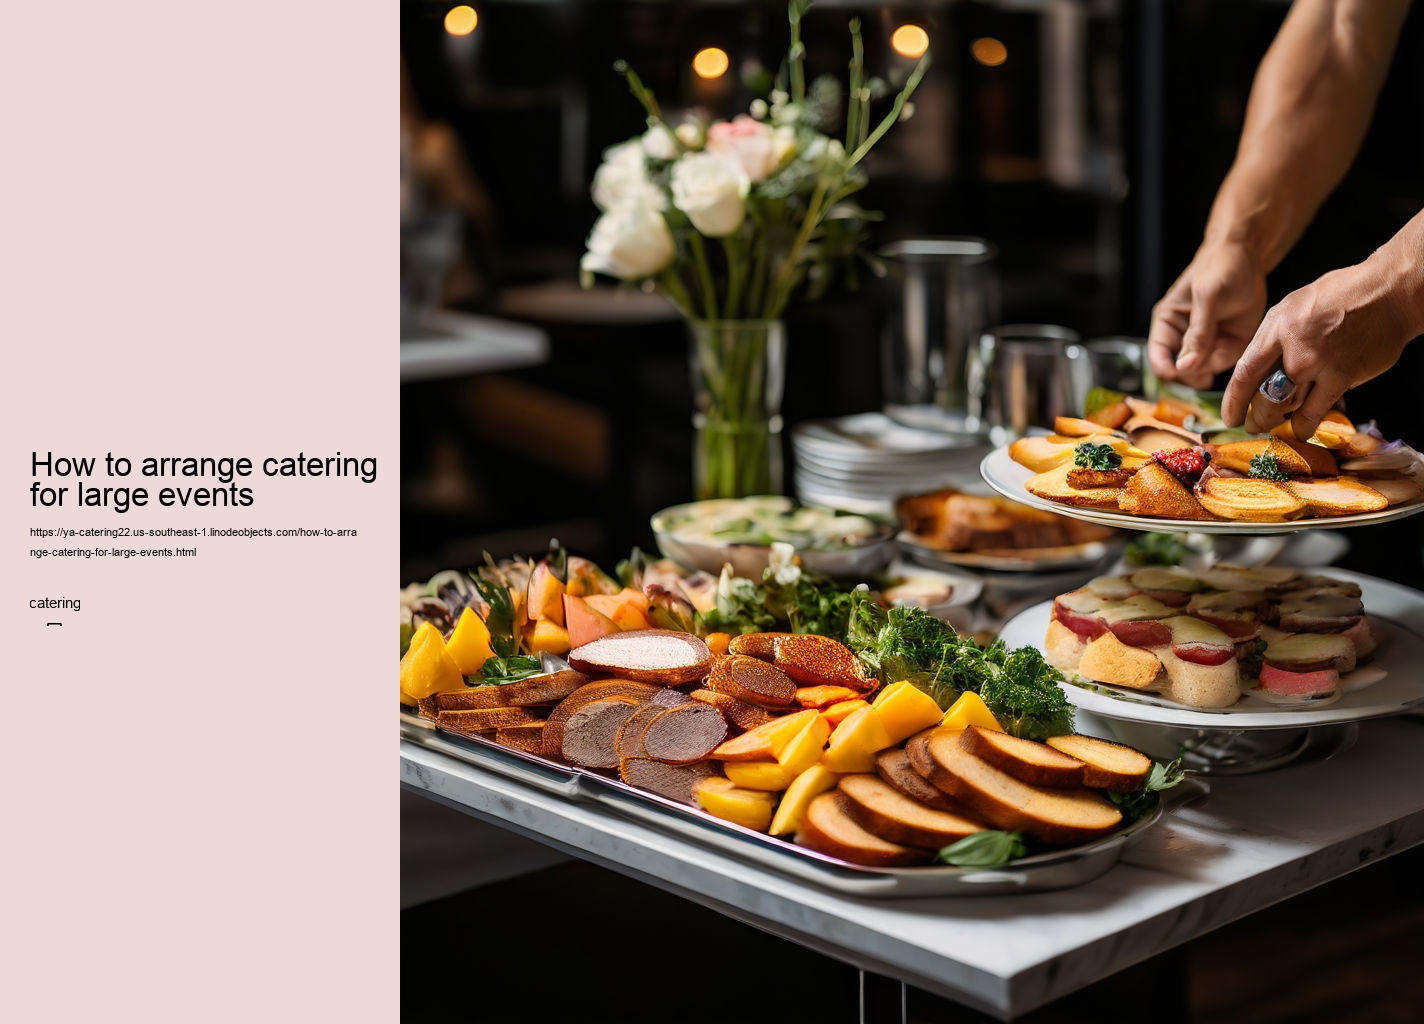 How to arrange catering for large events